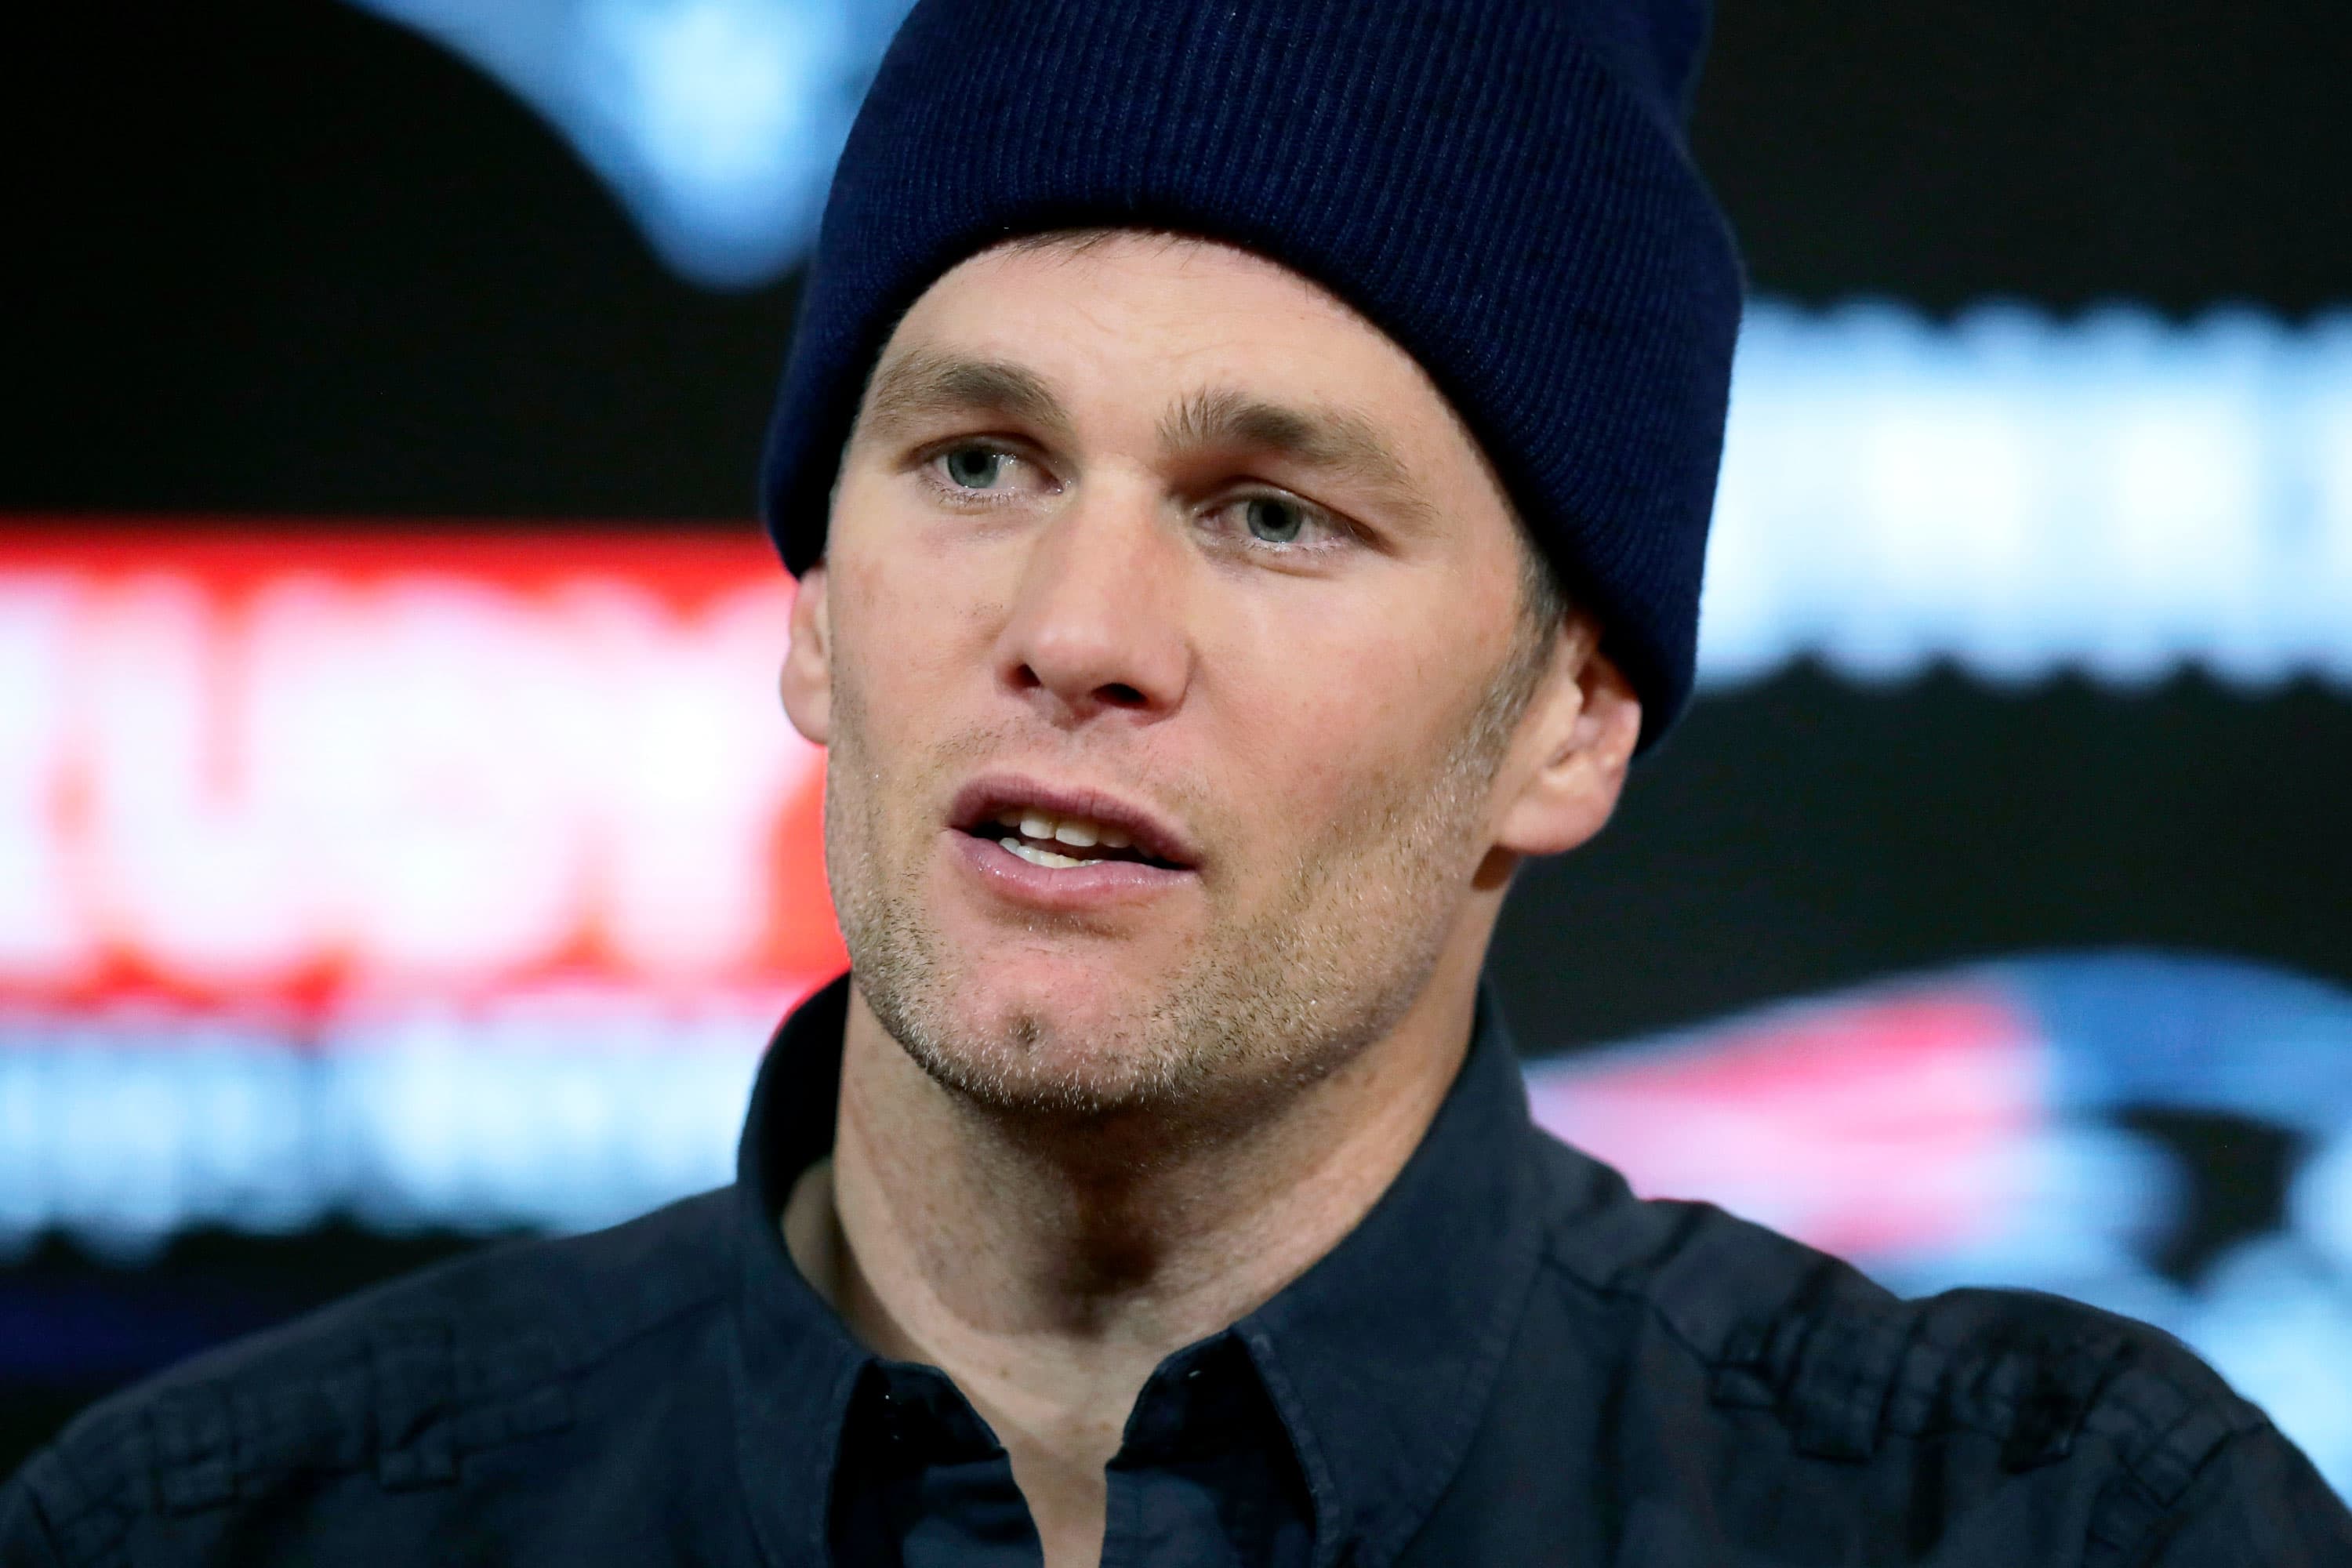 Tom Brady admits his 'laser eyes' didn't work on the bitcoin trade